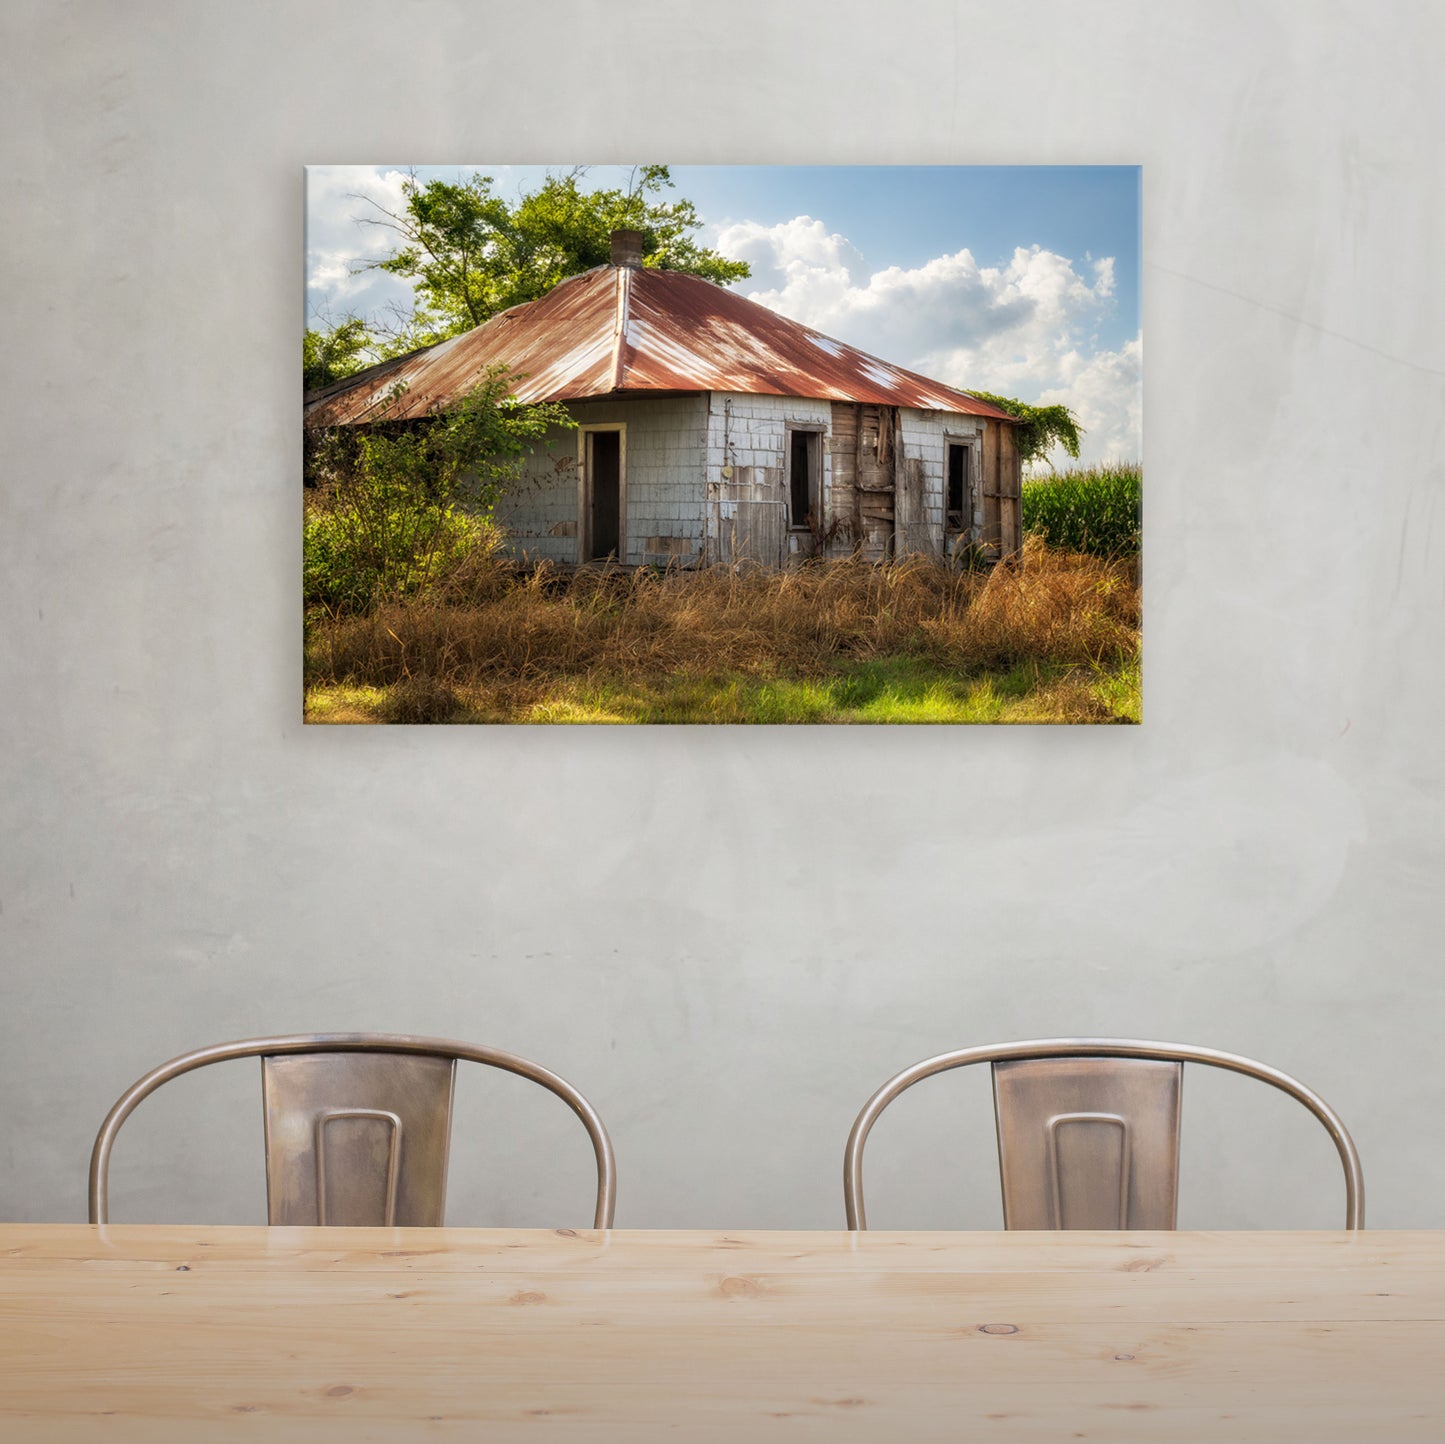 Historic charm encapsulated in a sharecropper cottage canvas art piece.